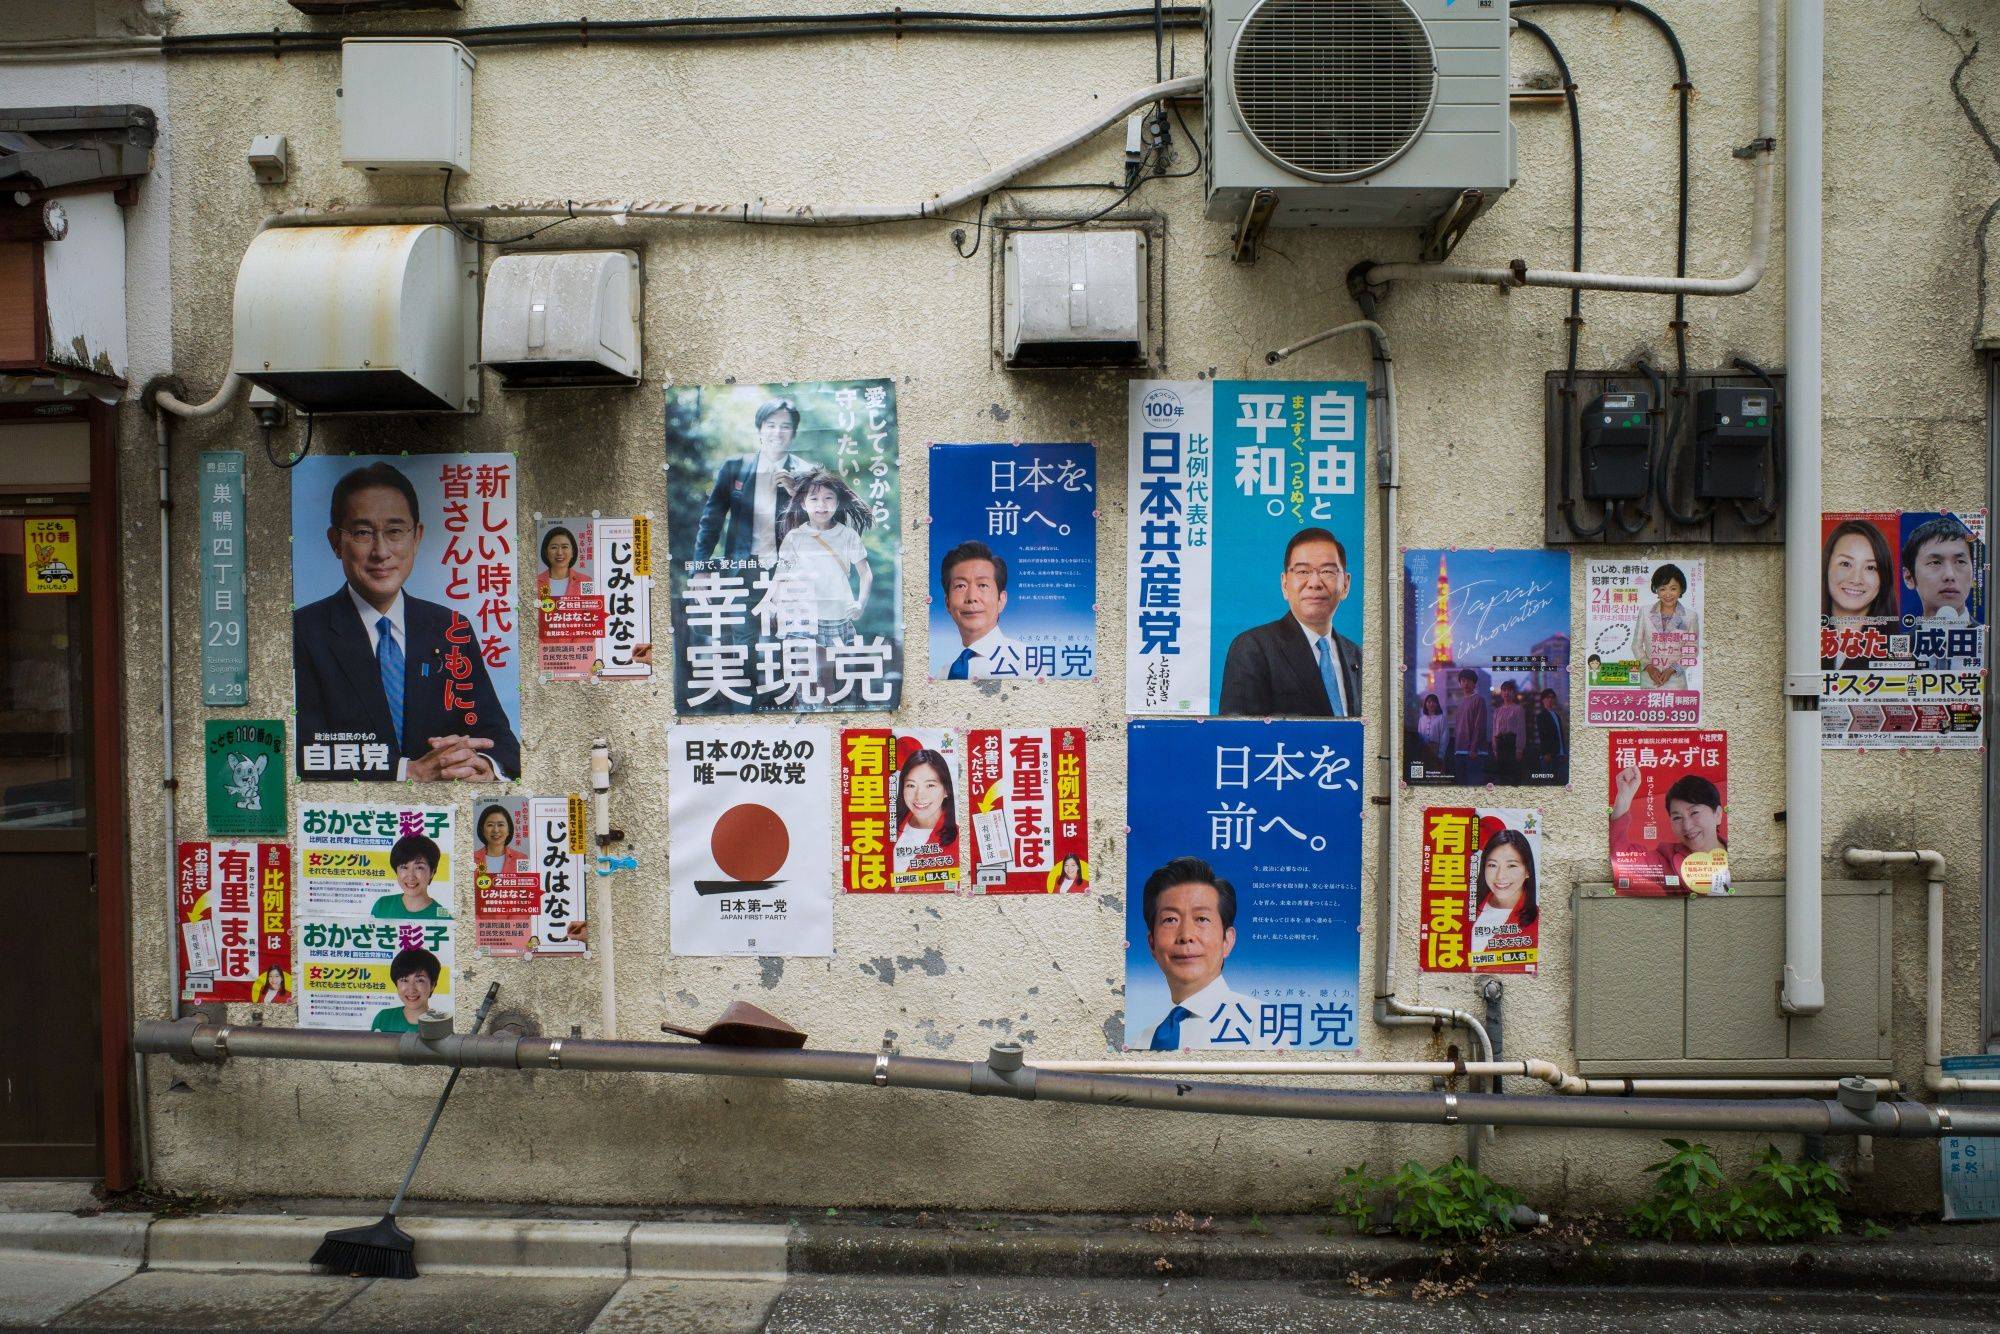 Campaign posters adorn a building in the Sugamo neighborhood of Tokyo on Wednesday ahead of the Upper House  election on Sunday. | BLOOMBERG